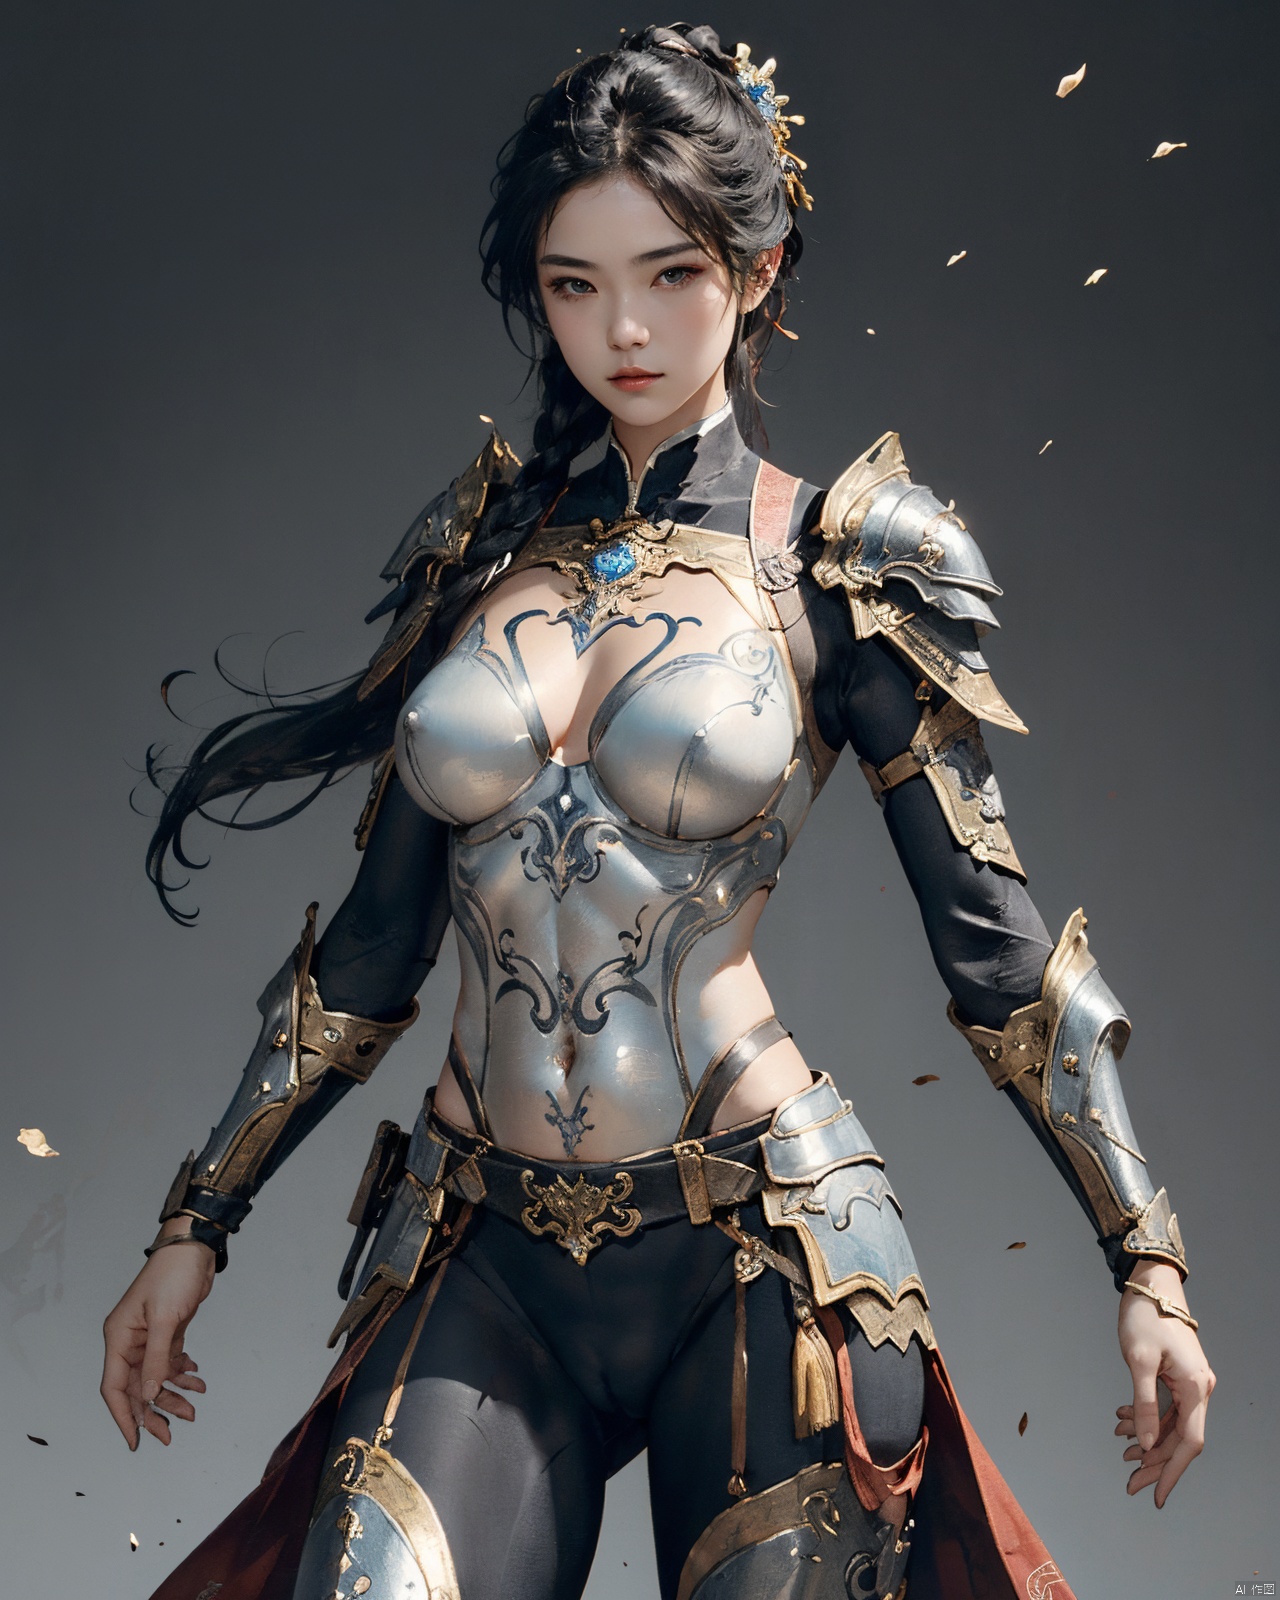  masterpiece,best quality,1girl, beautiful chinese girl, (beautiful detailed armor), (silver armor),(bodypaint:1.2),silver overall bodysuit,
Game art,The best picture quality,Highest resolution,8K,(Female Warrior),looking at viewer,
An eye rich in detail,(knightess),Elegant and noble,indifferent,brave,metallic breastplate,pauldron,gardebras,(cameltoe),
(Ancient runes of light,Combat accessories with rich details,Metallic luster),simple background,
(super fucking cool:1.2),